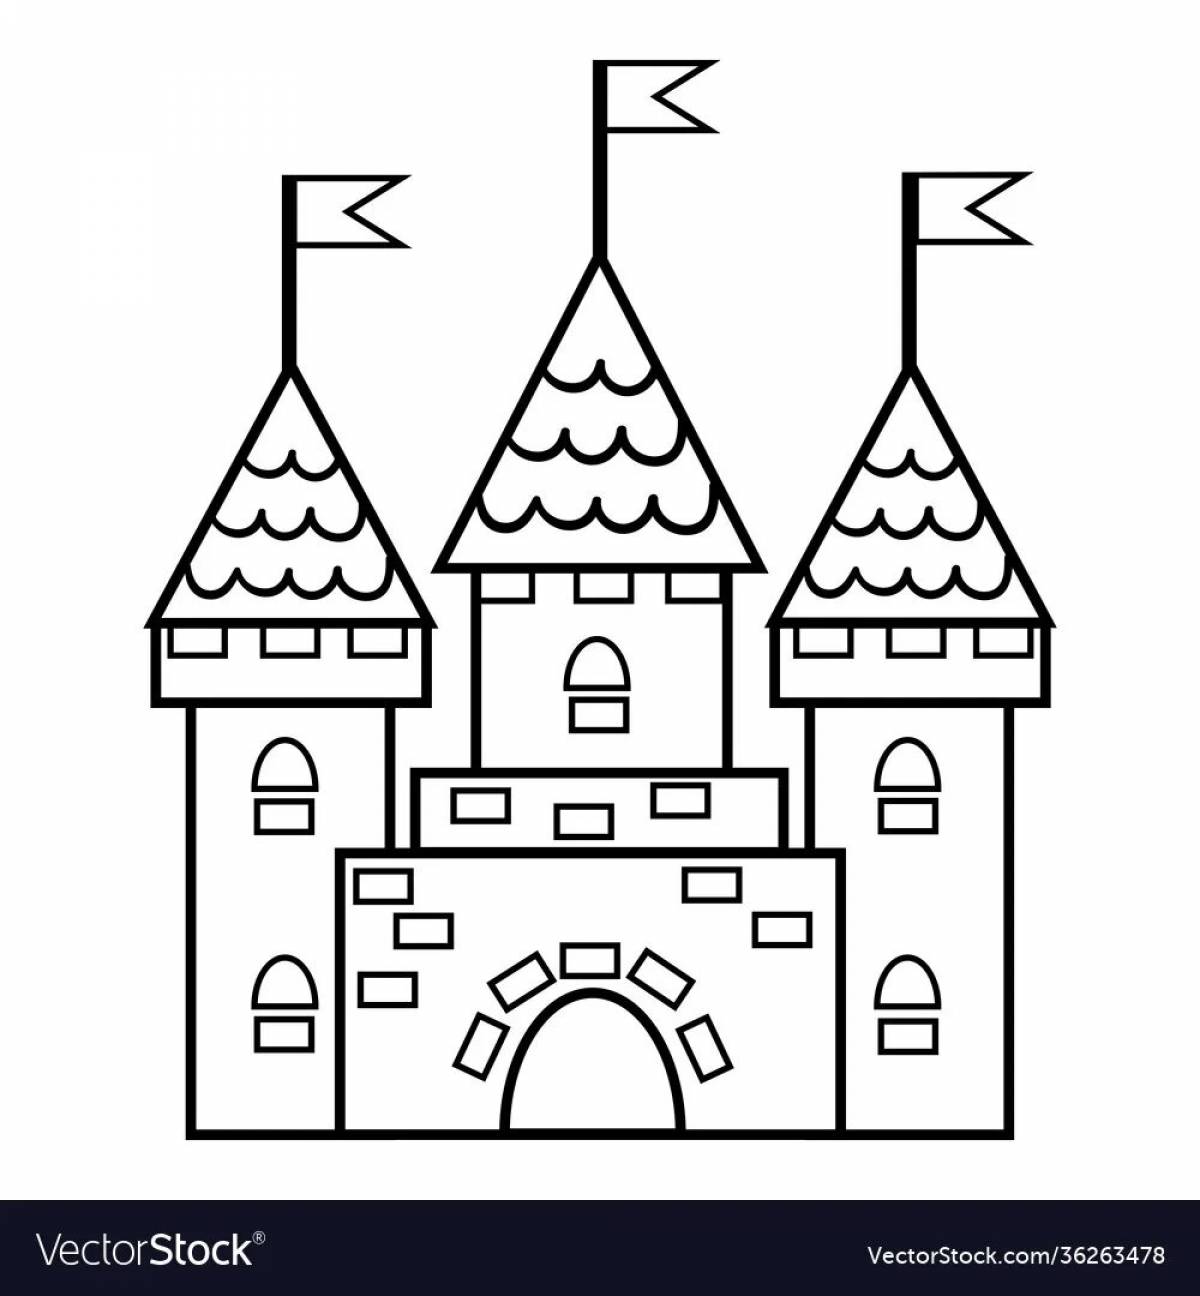 Coloring book funny fairytale castle